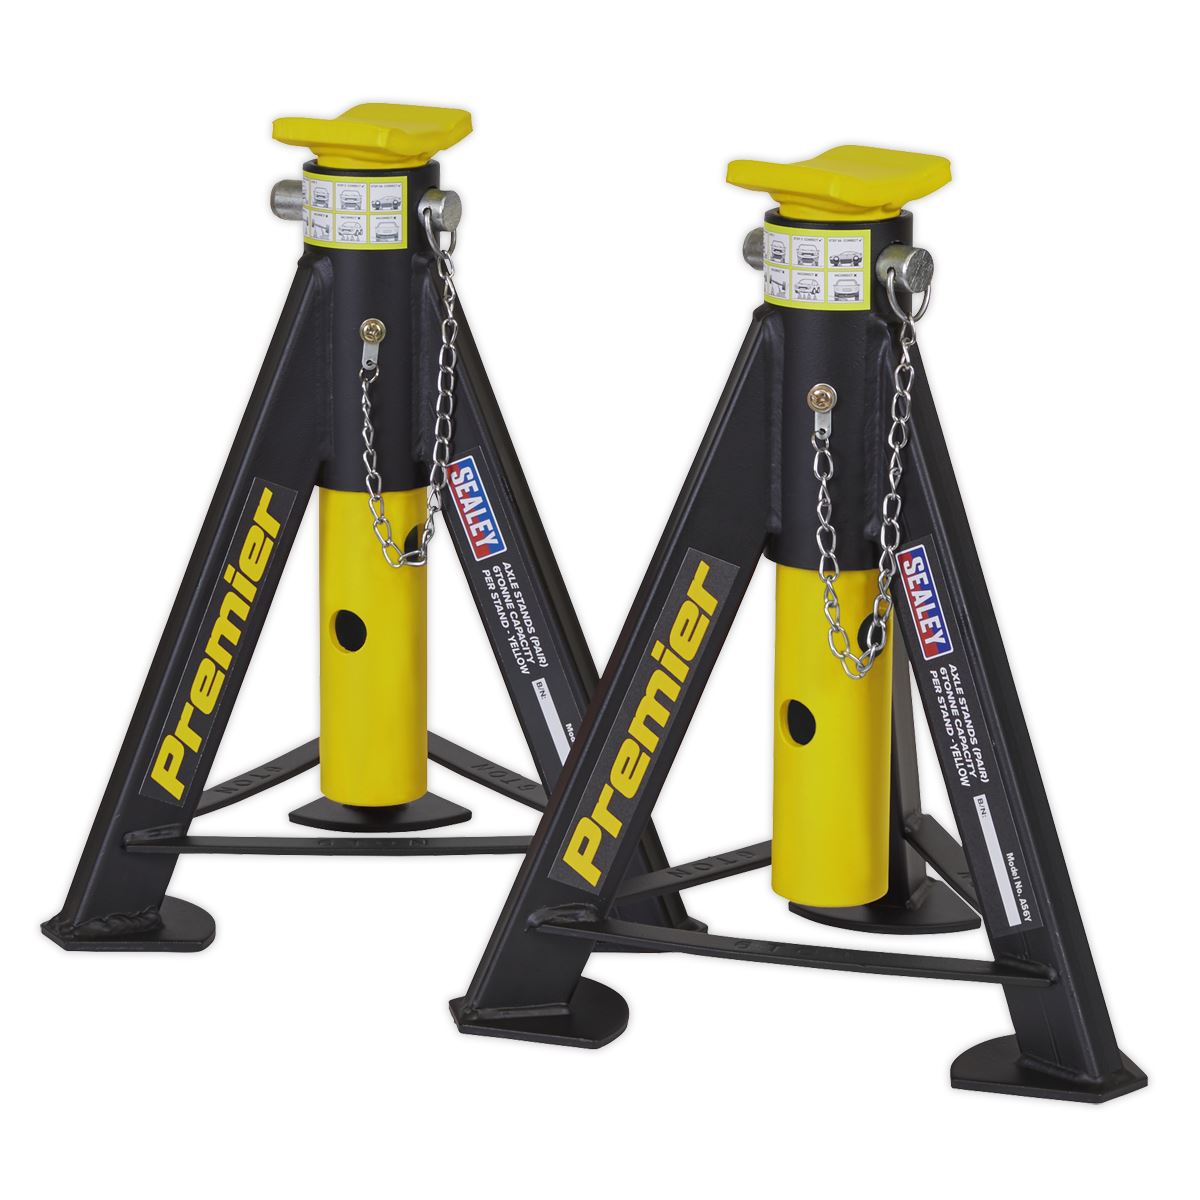 Sealey Premier Premier Axle Stands (Pair) 6 Tonne Capacity per Stand - Yellow